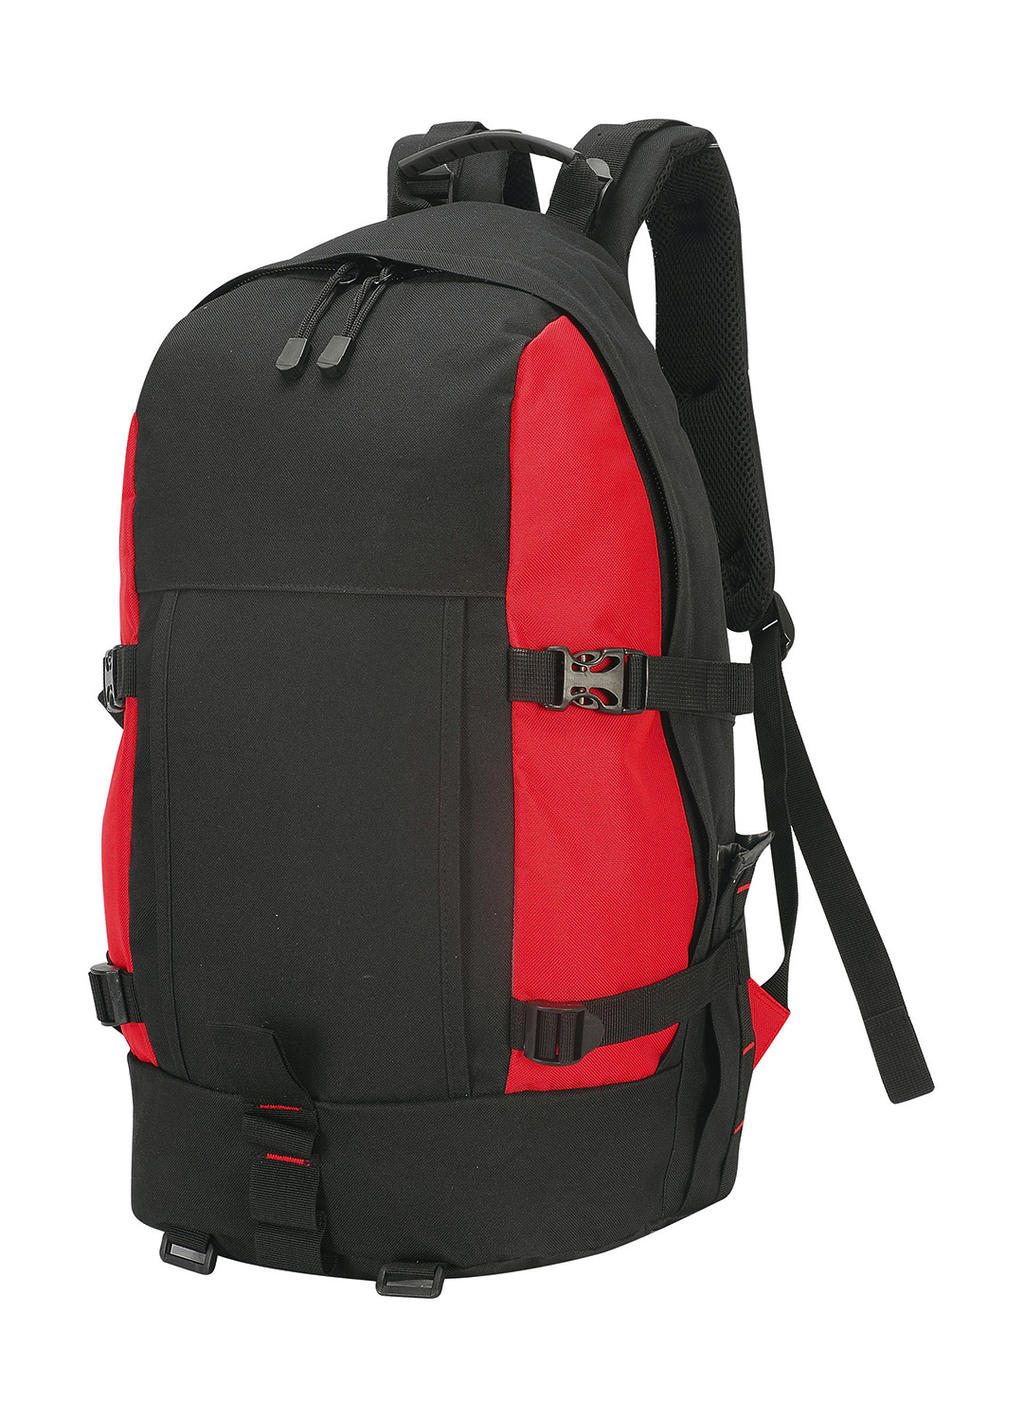  Gran Paradiso Hiker Backpack in Farbe Black/Red